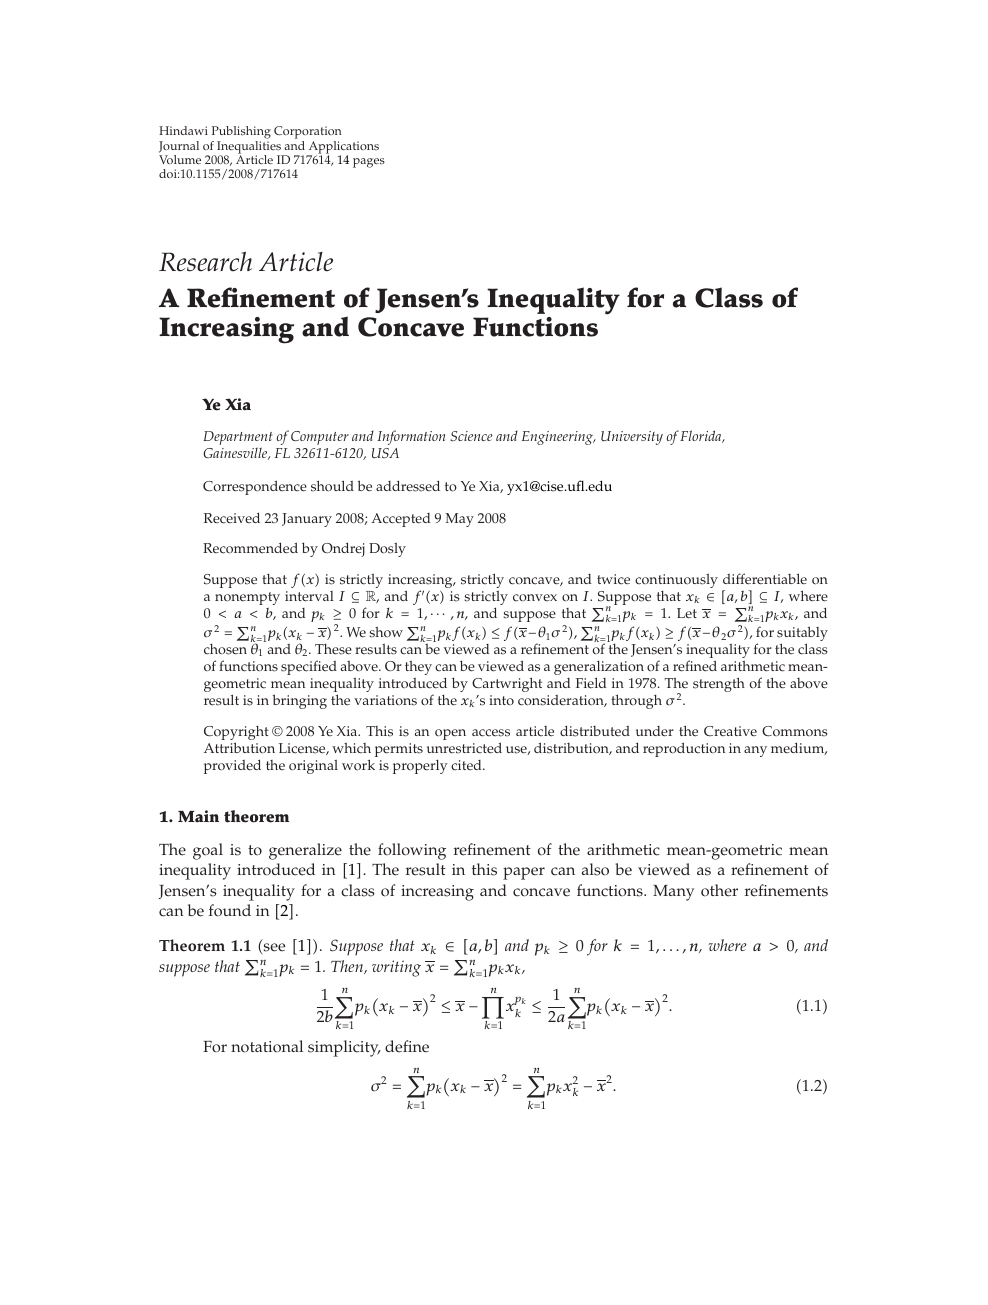 A Refinement Of Jensen S Inequality For A Class Of Increasing And Concave Functions Topic Of Research Paper In Mathematics Download Scholarly Article Pdf And Read For Free On Cyberleninka Open Science